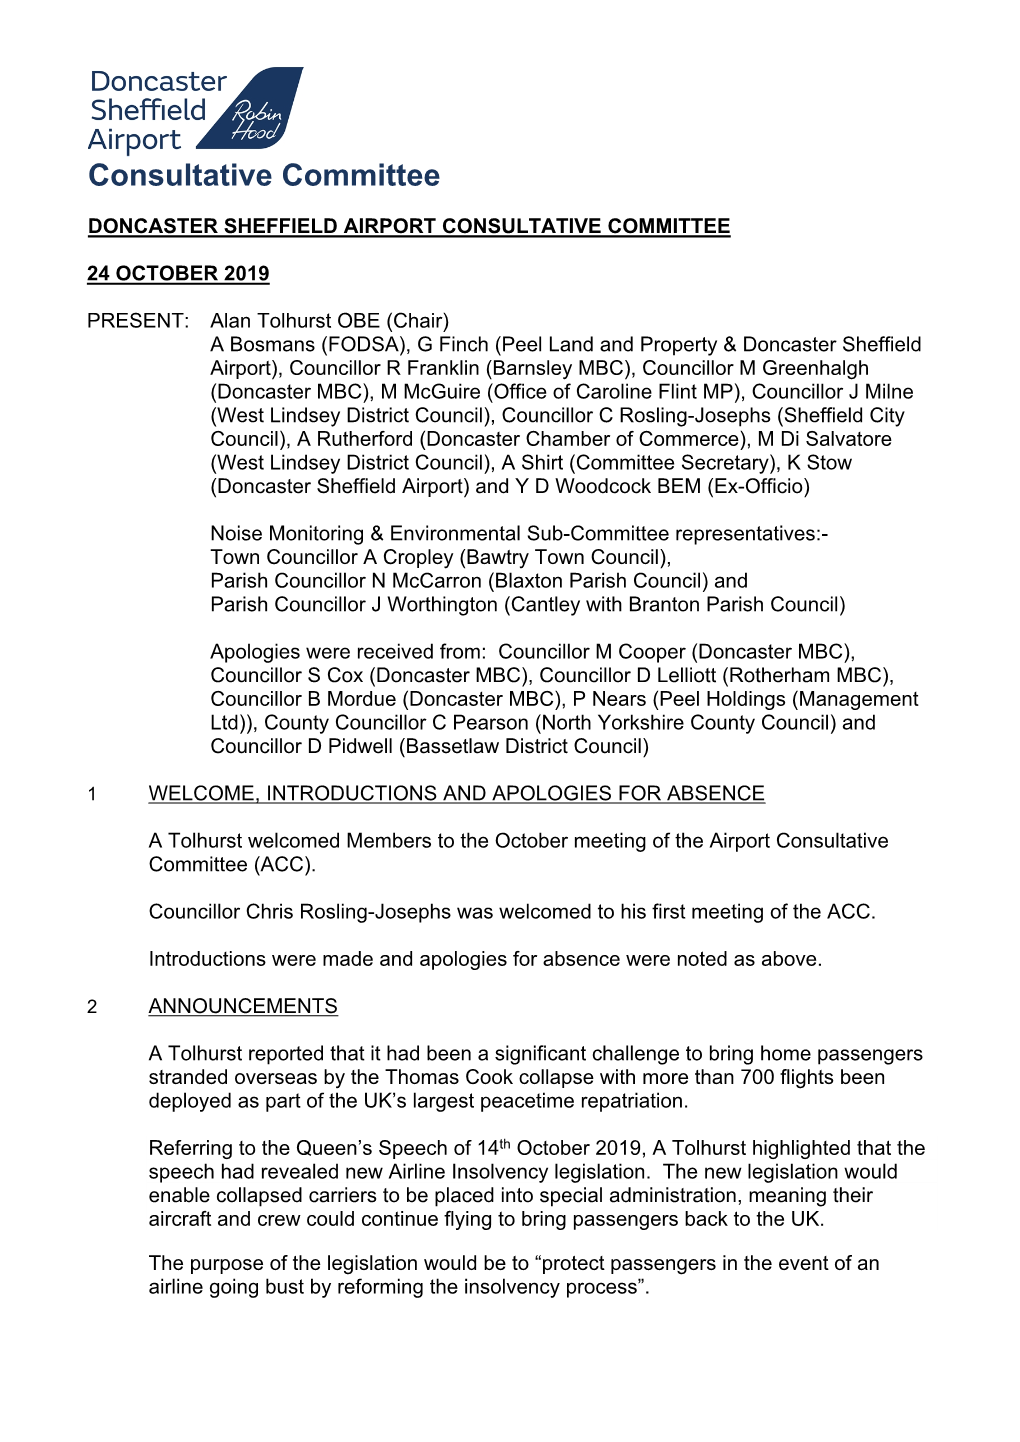 Doncaster Sheffield Airport Consultative Committee